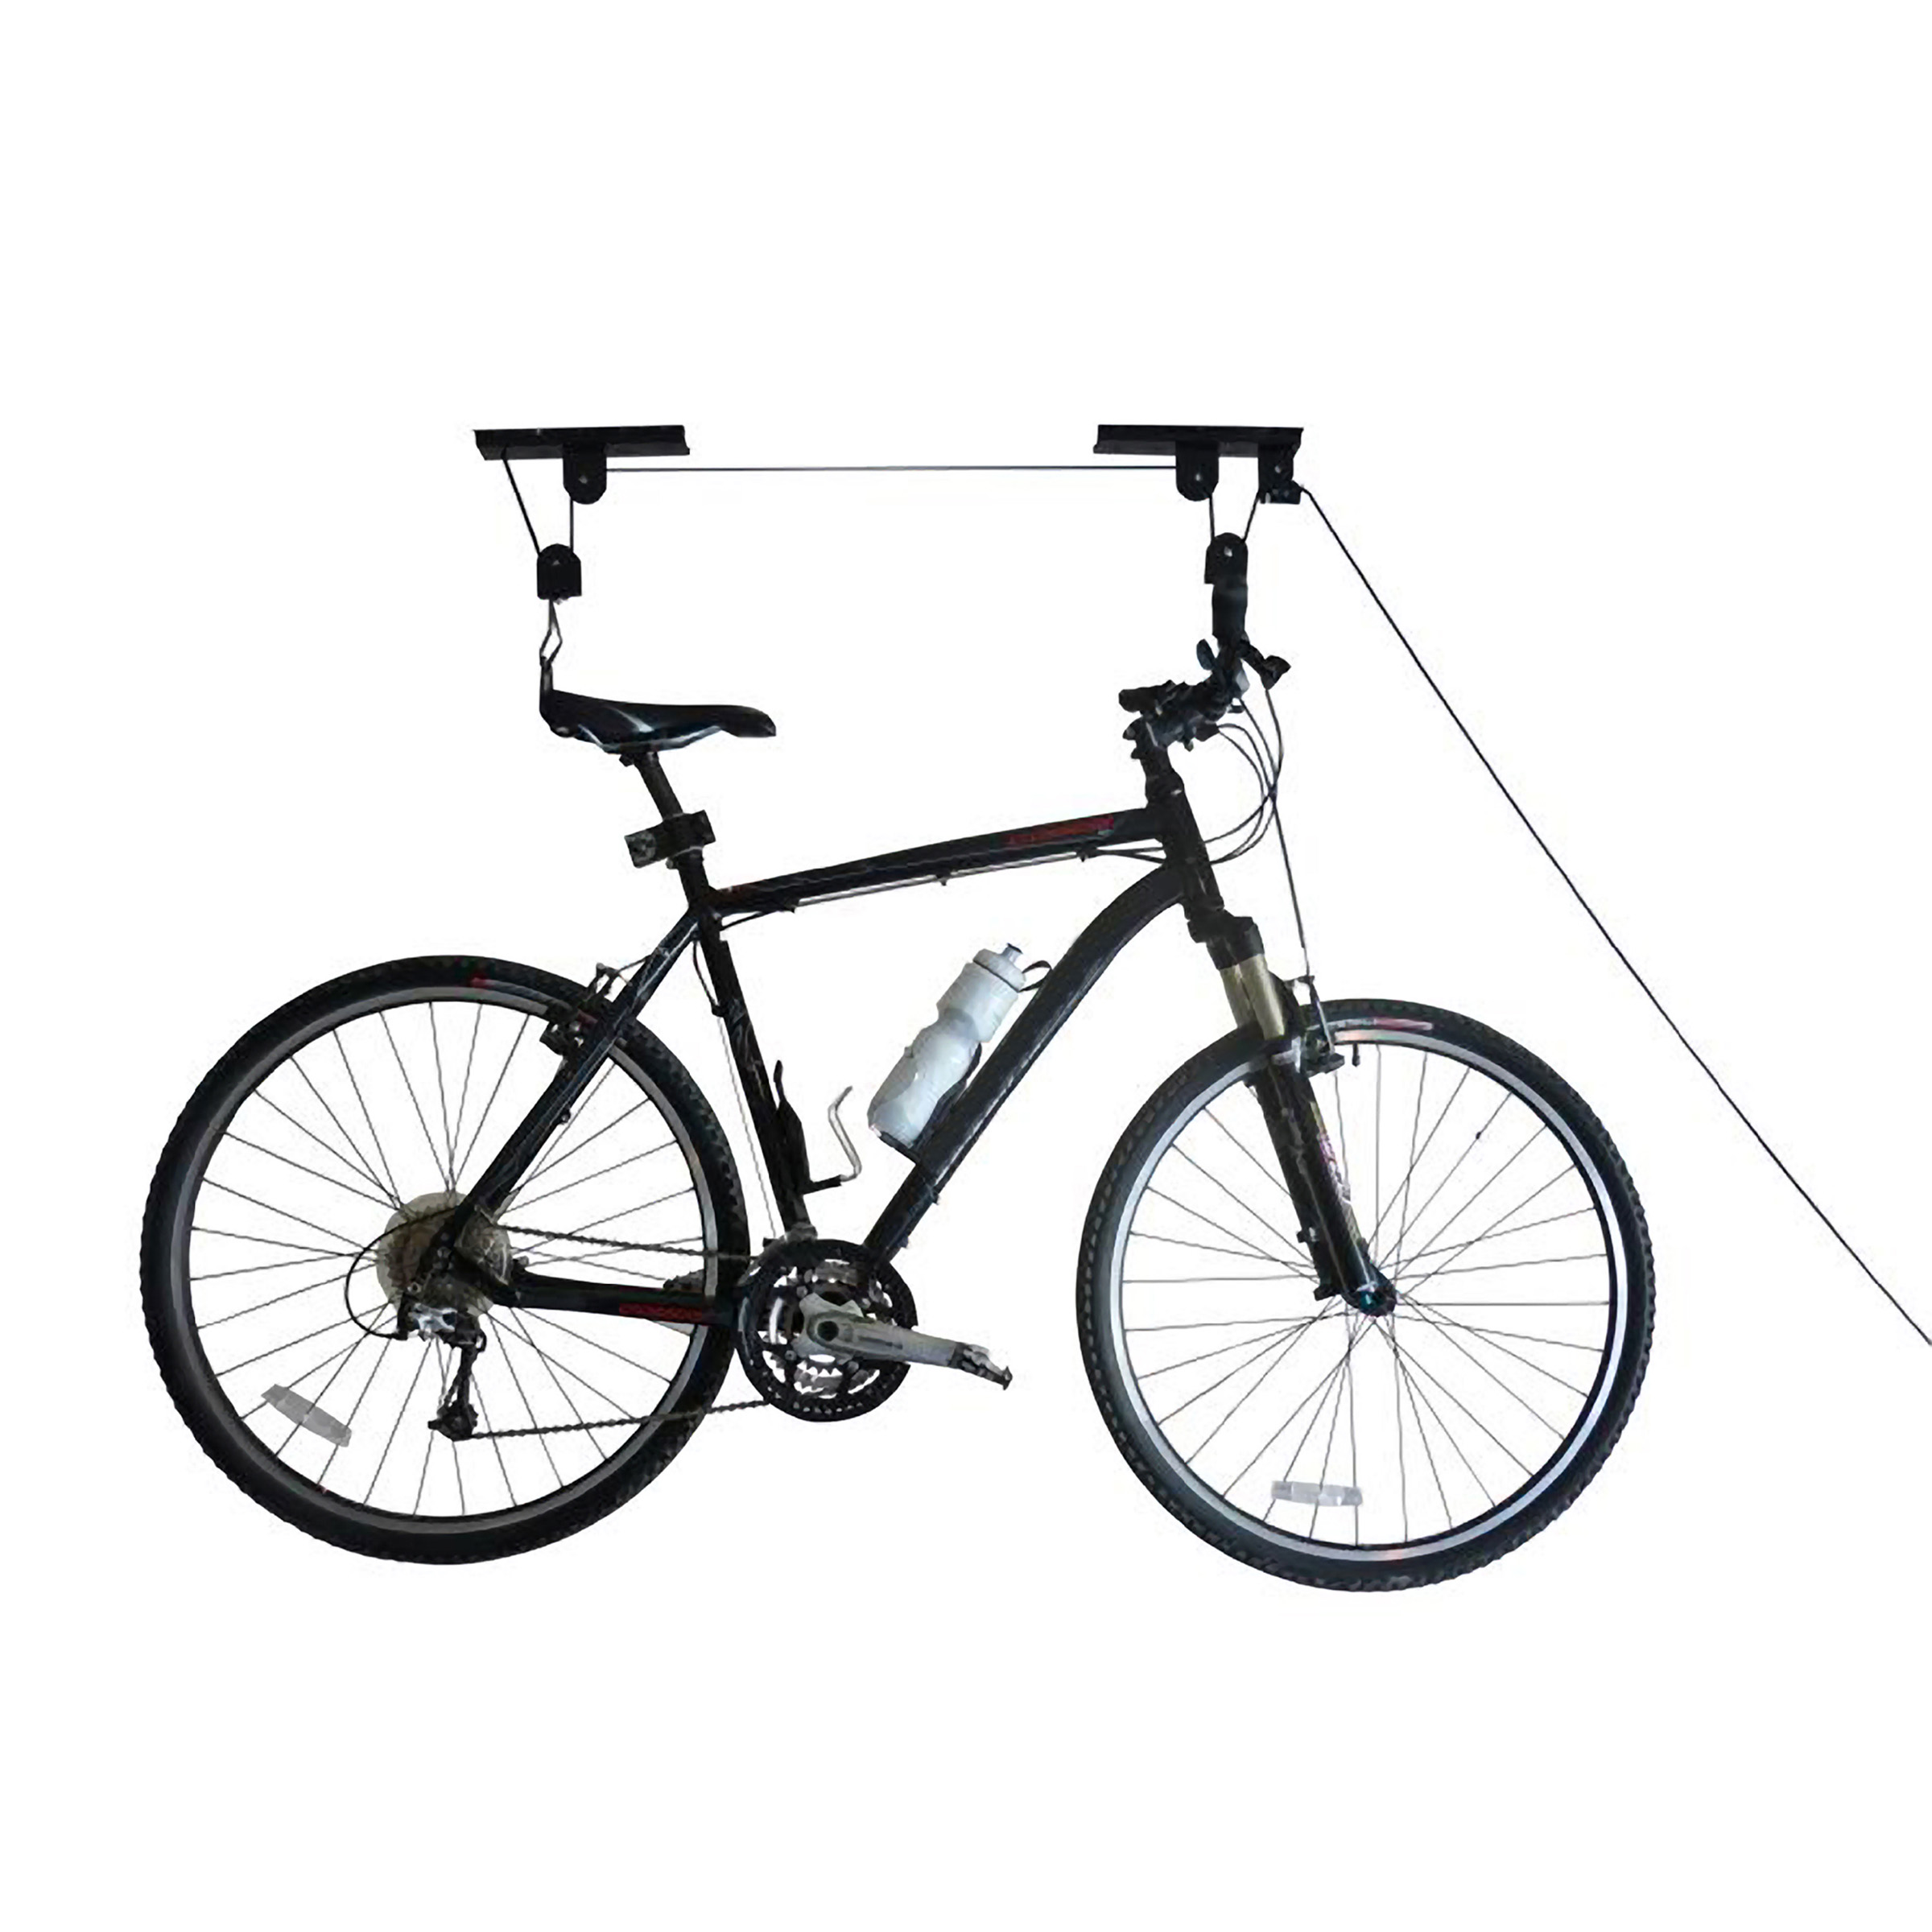 Bike Hanger ? Overhead Hoist Pulley System with 100lb Capacity for Bicycles or Ladders ? Secure Garage Ceiling Storage by Rad Cycle - image 5 of 8